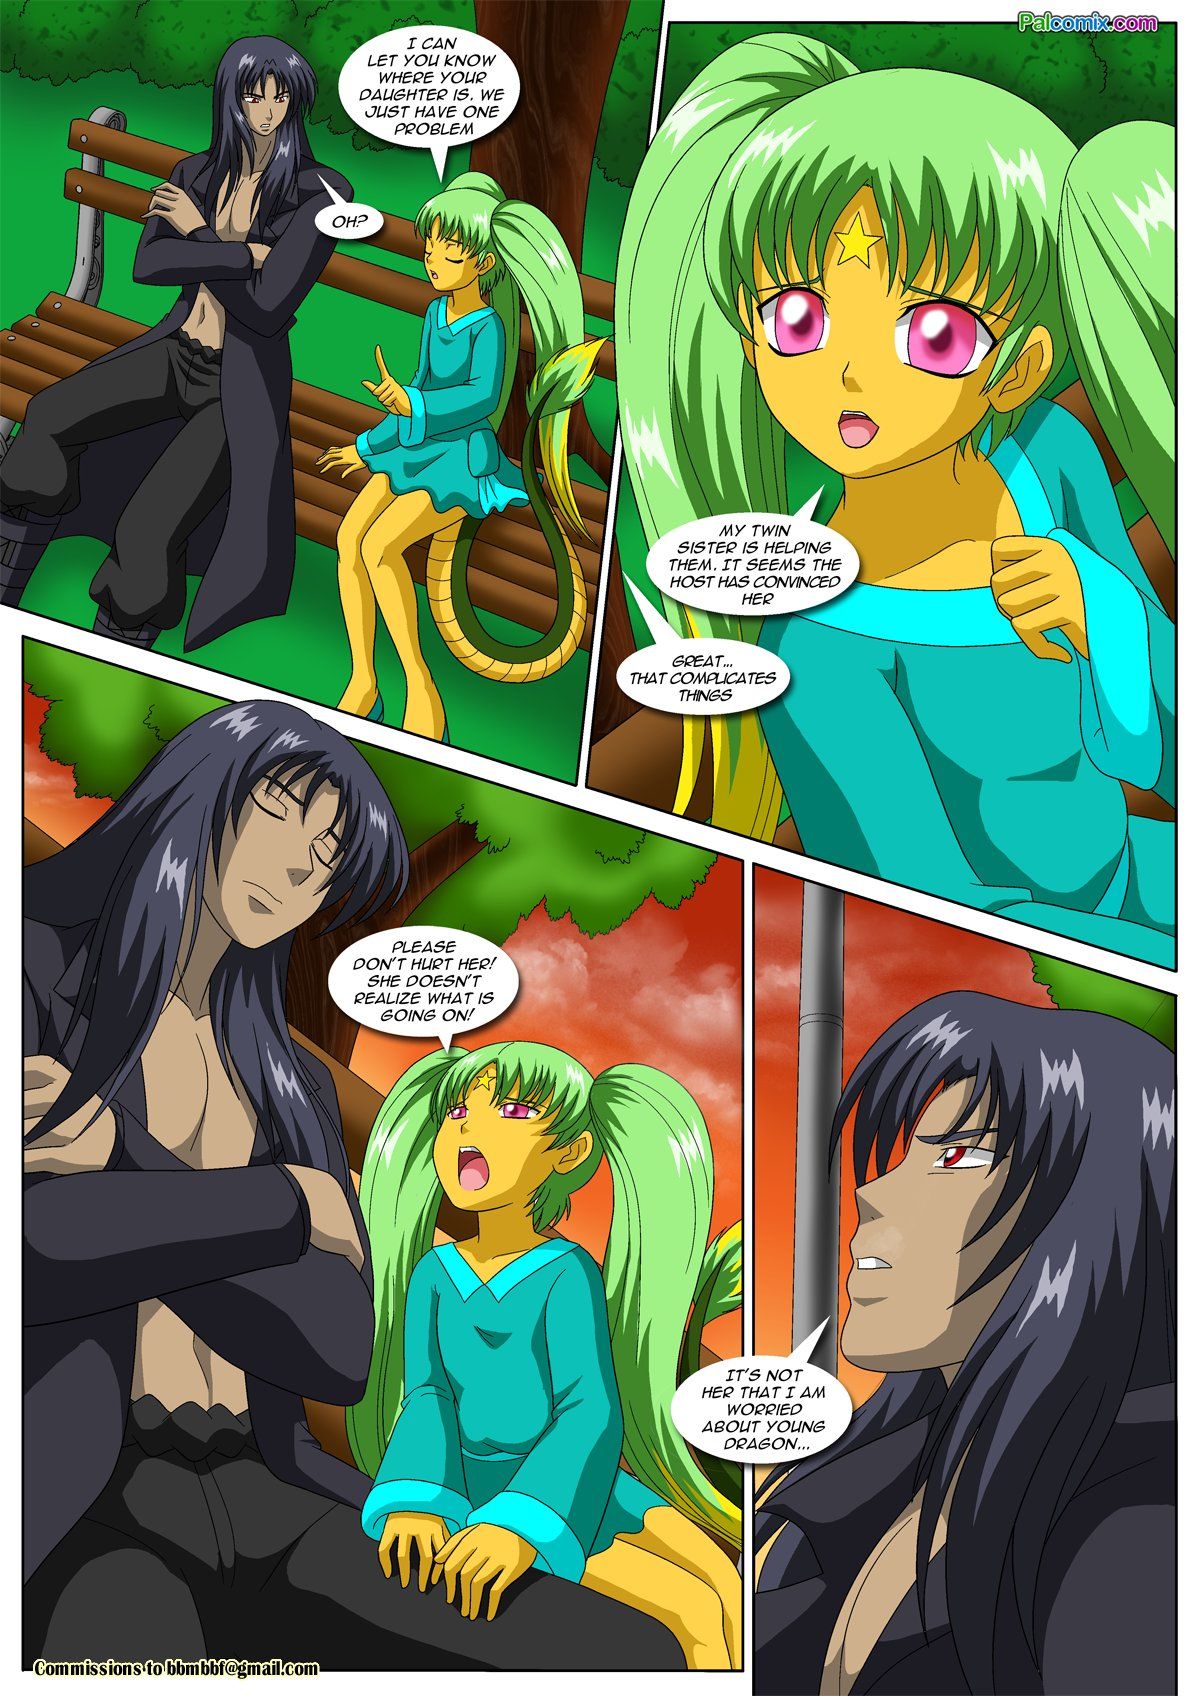 The Carnal Kingdom 6 - Angels and Demons page 20